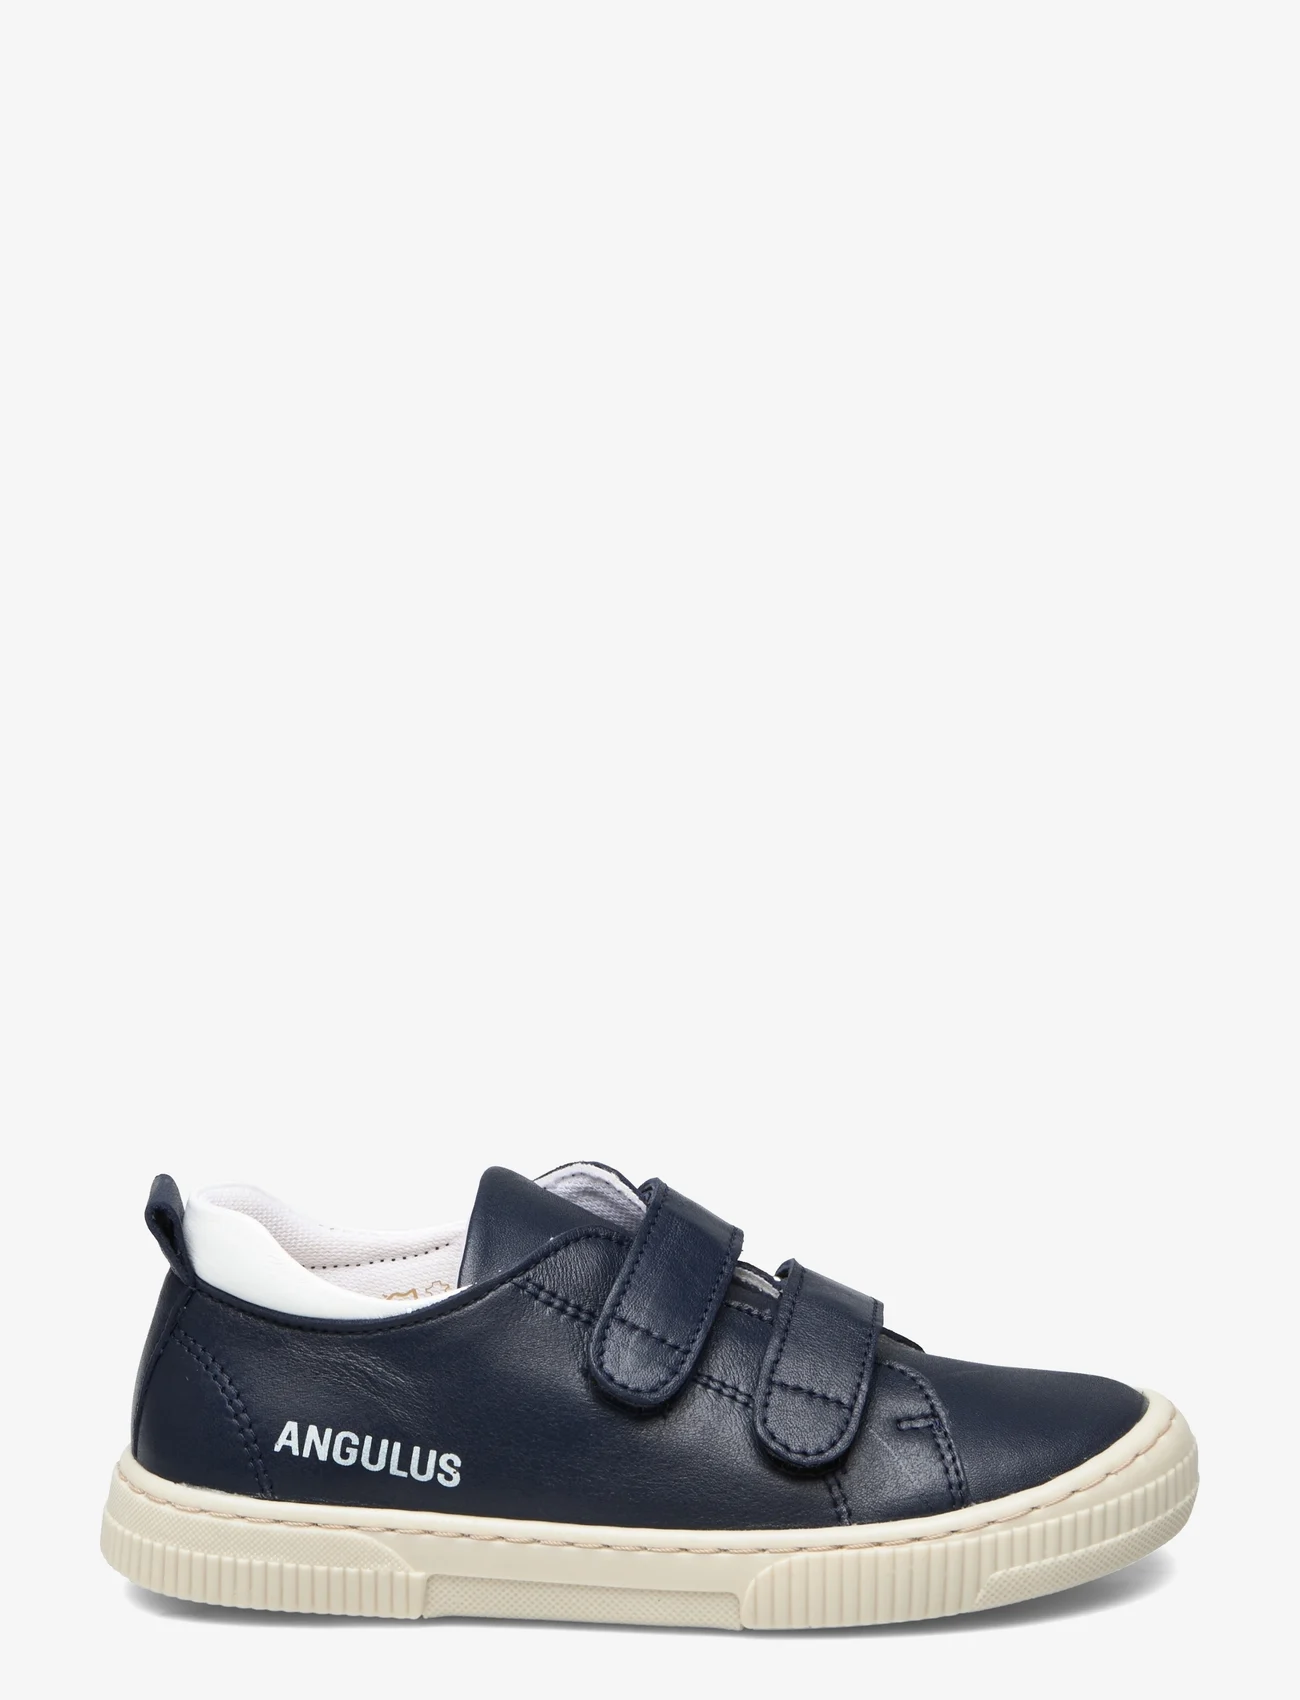 ANGULUS - Shoes - flat - with velcro - sommerschnäppchen - 2585/1521 navy/white - 1